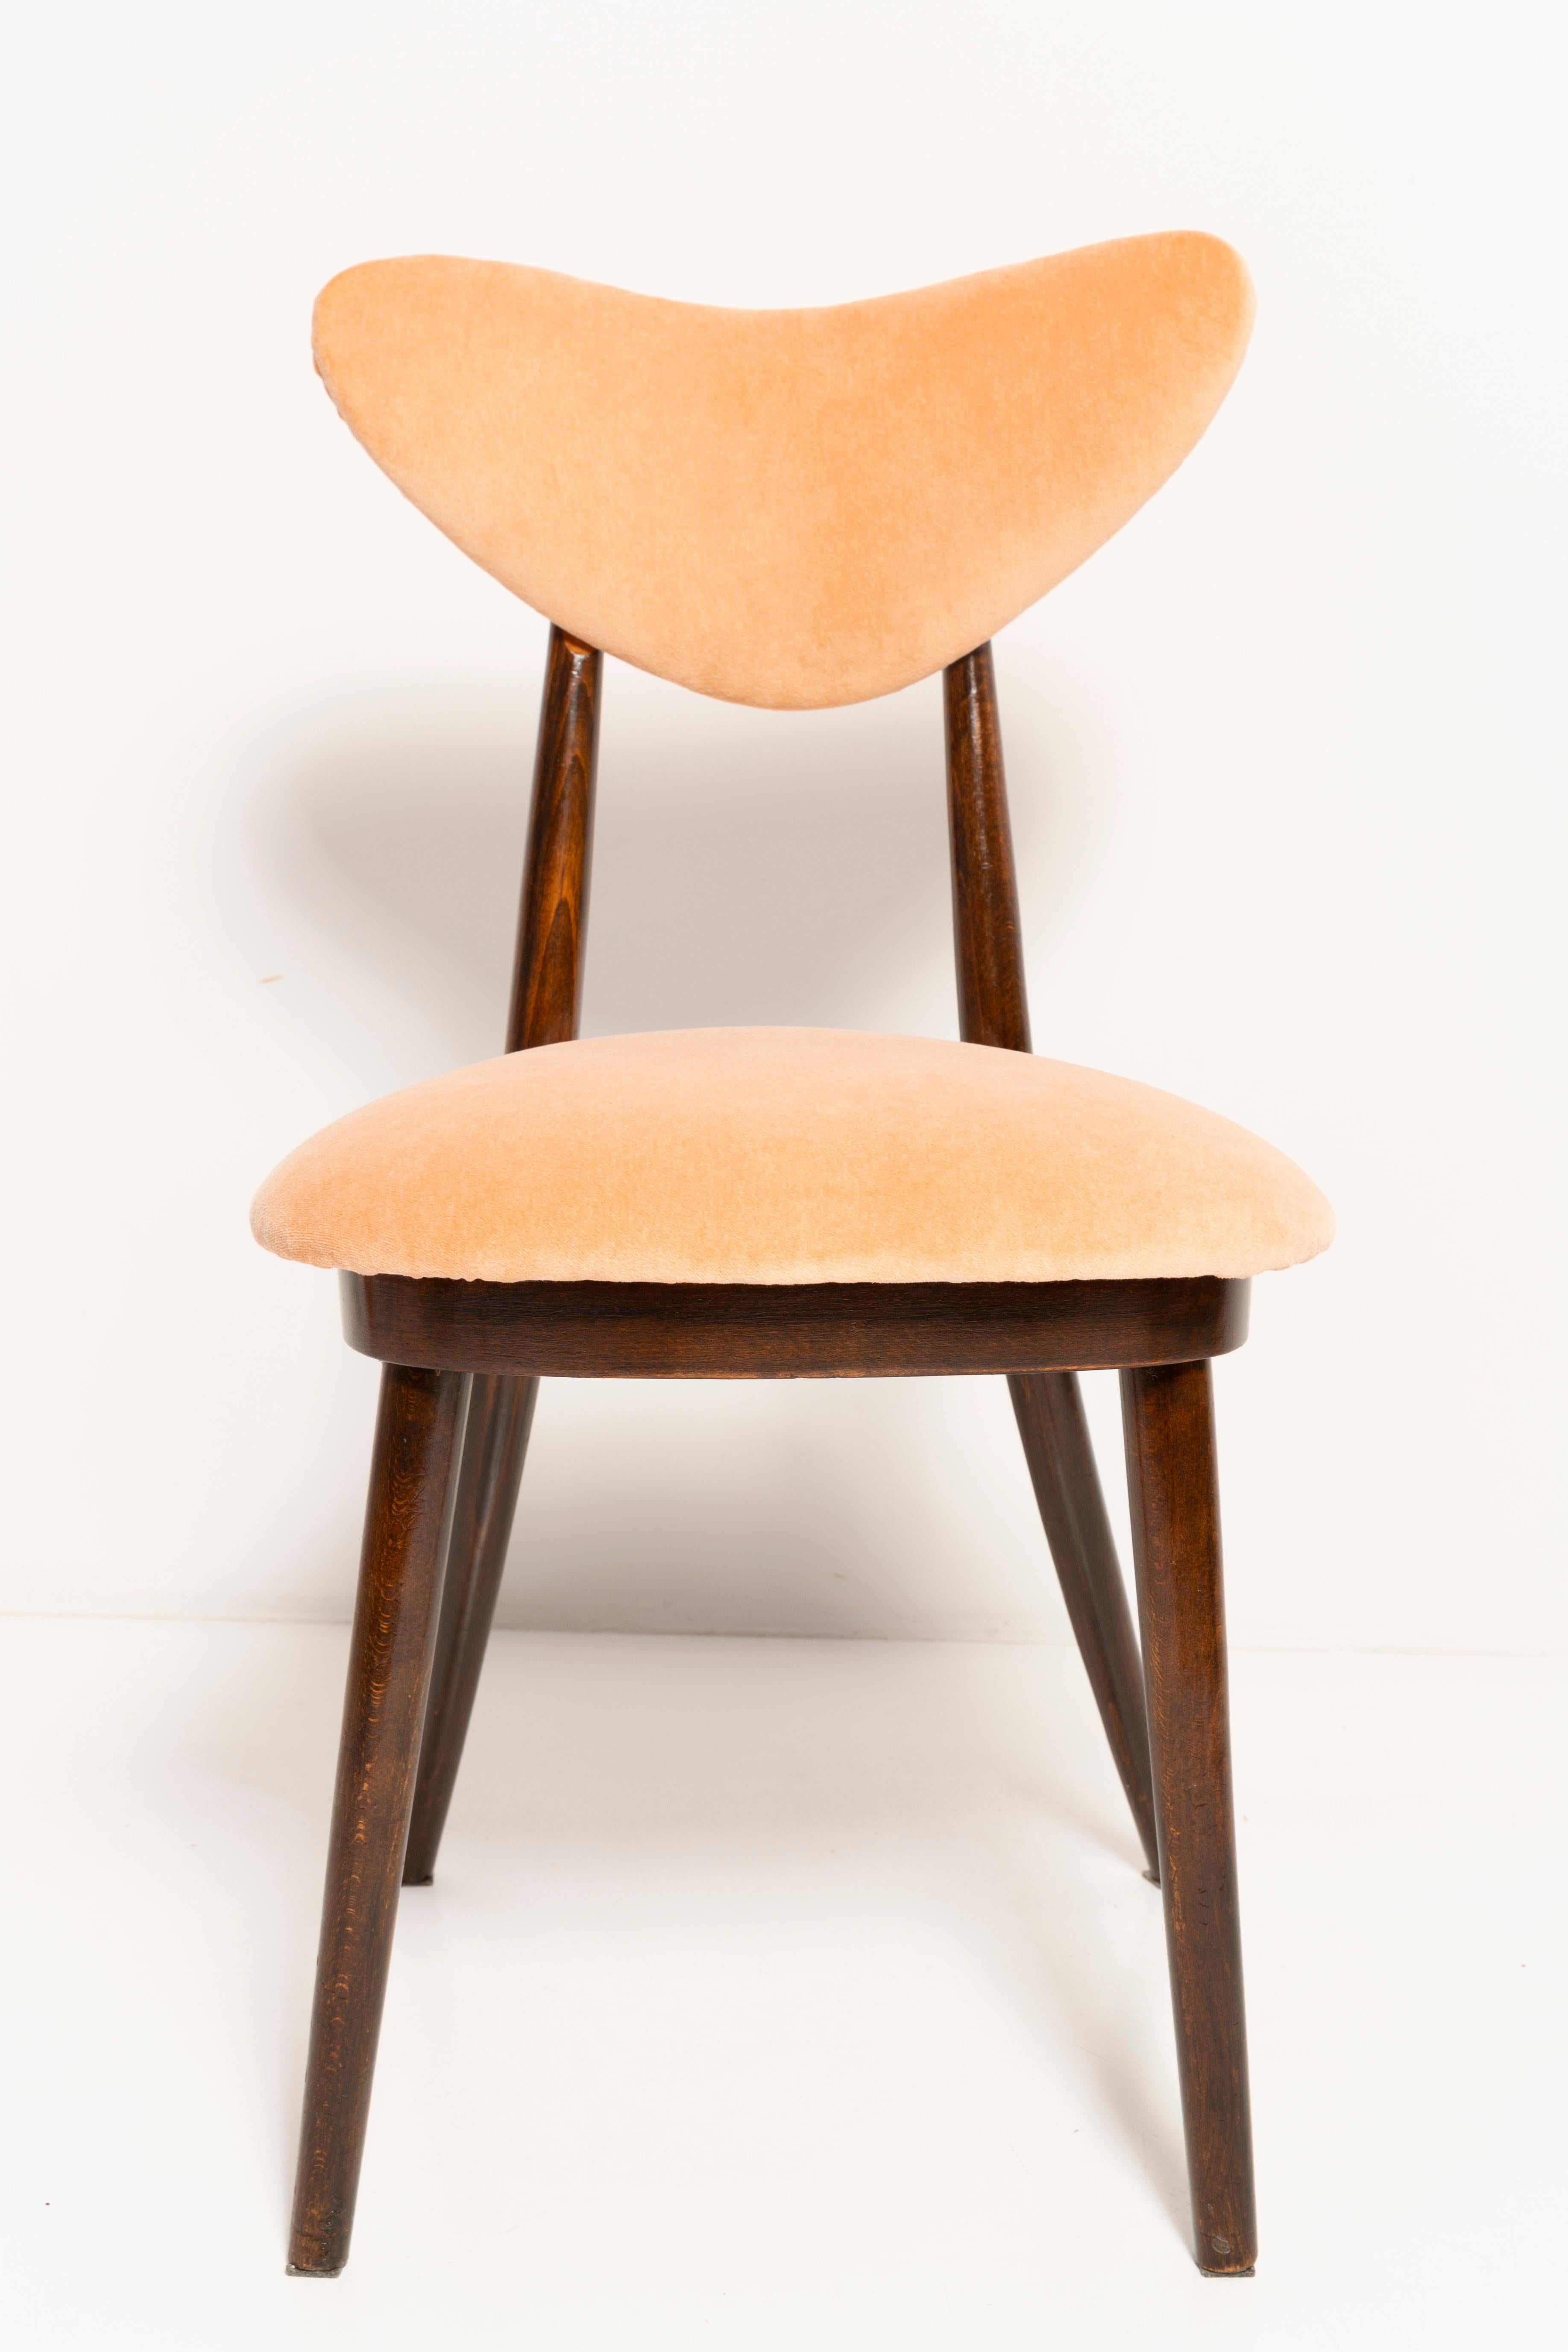 Hand-Crafted Set of Eight Mid-Century Orange Cotton-Velvet Heart Chairs, Europe, 1960s For Sale